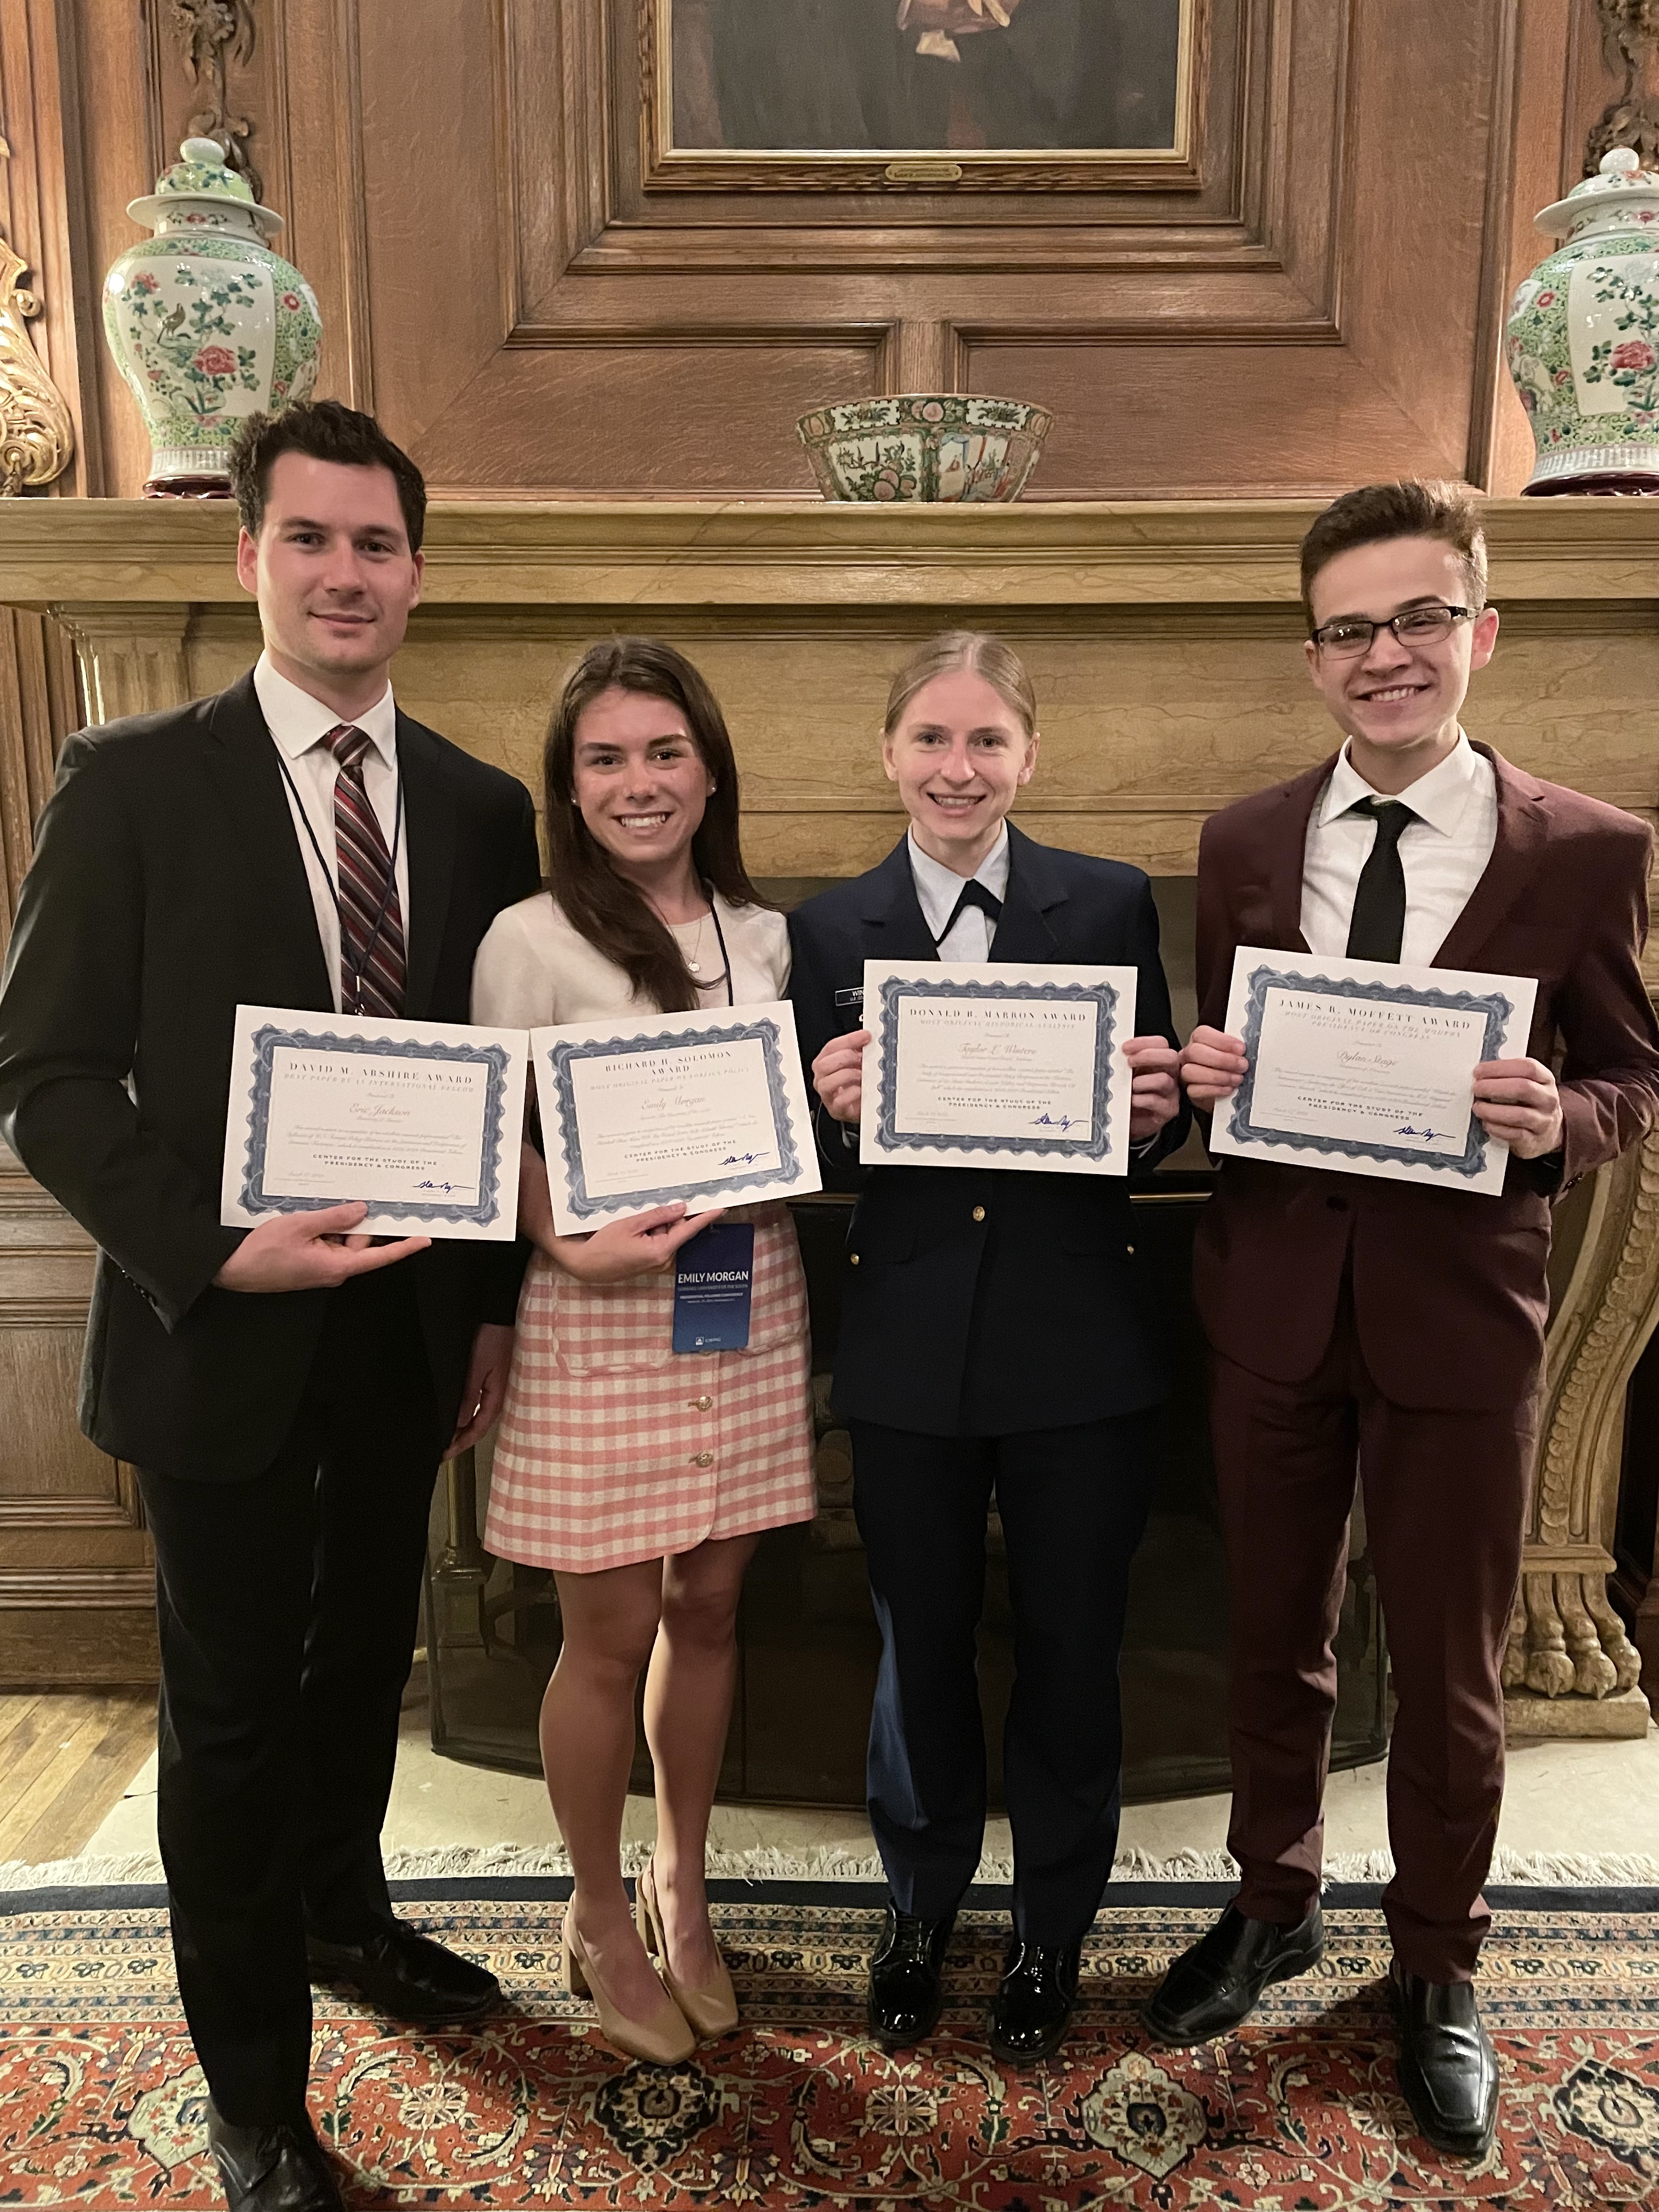 Dylan Stage and other Presidential Fellows holding paper awards.